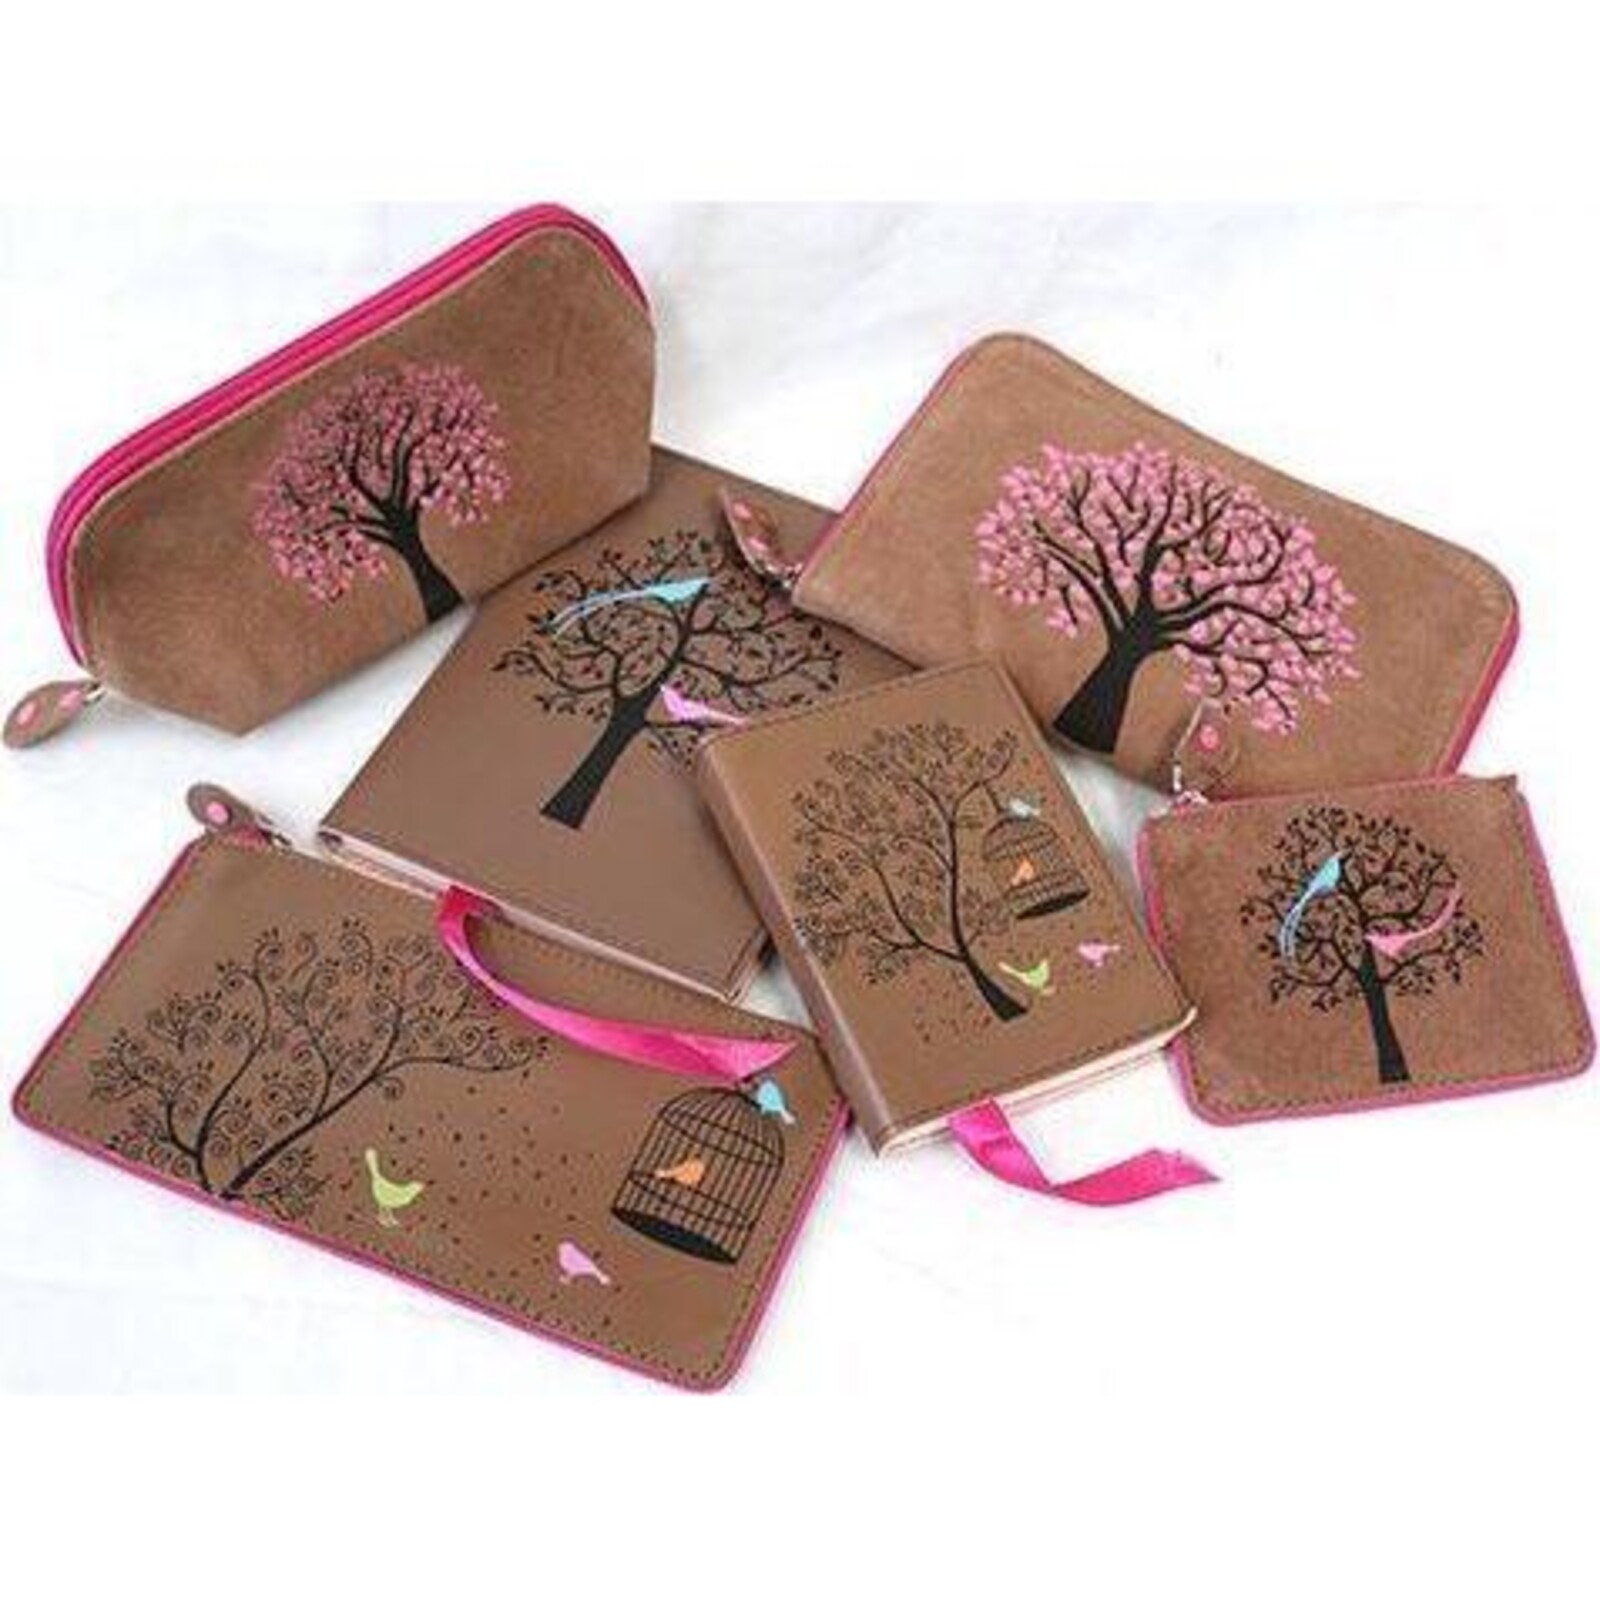 Suede  Pouch Pink Tree